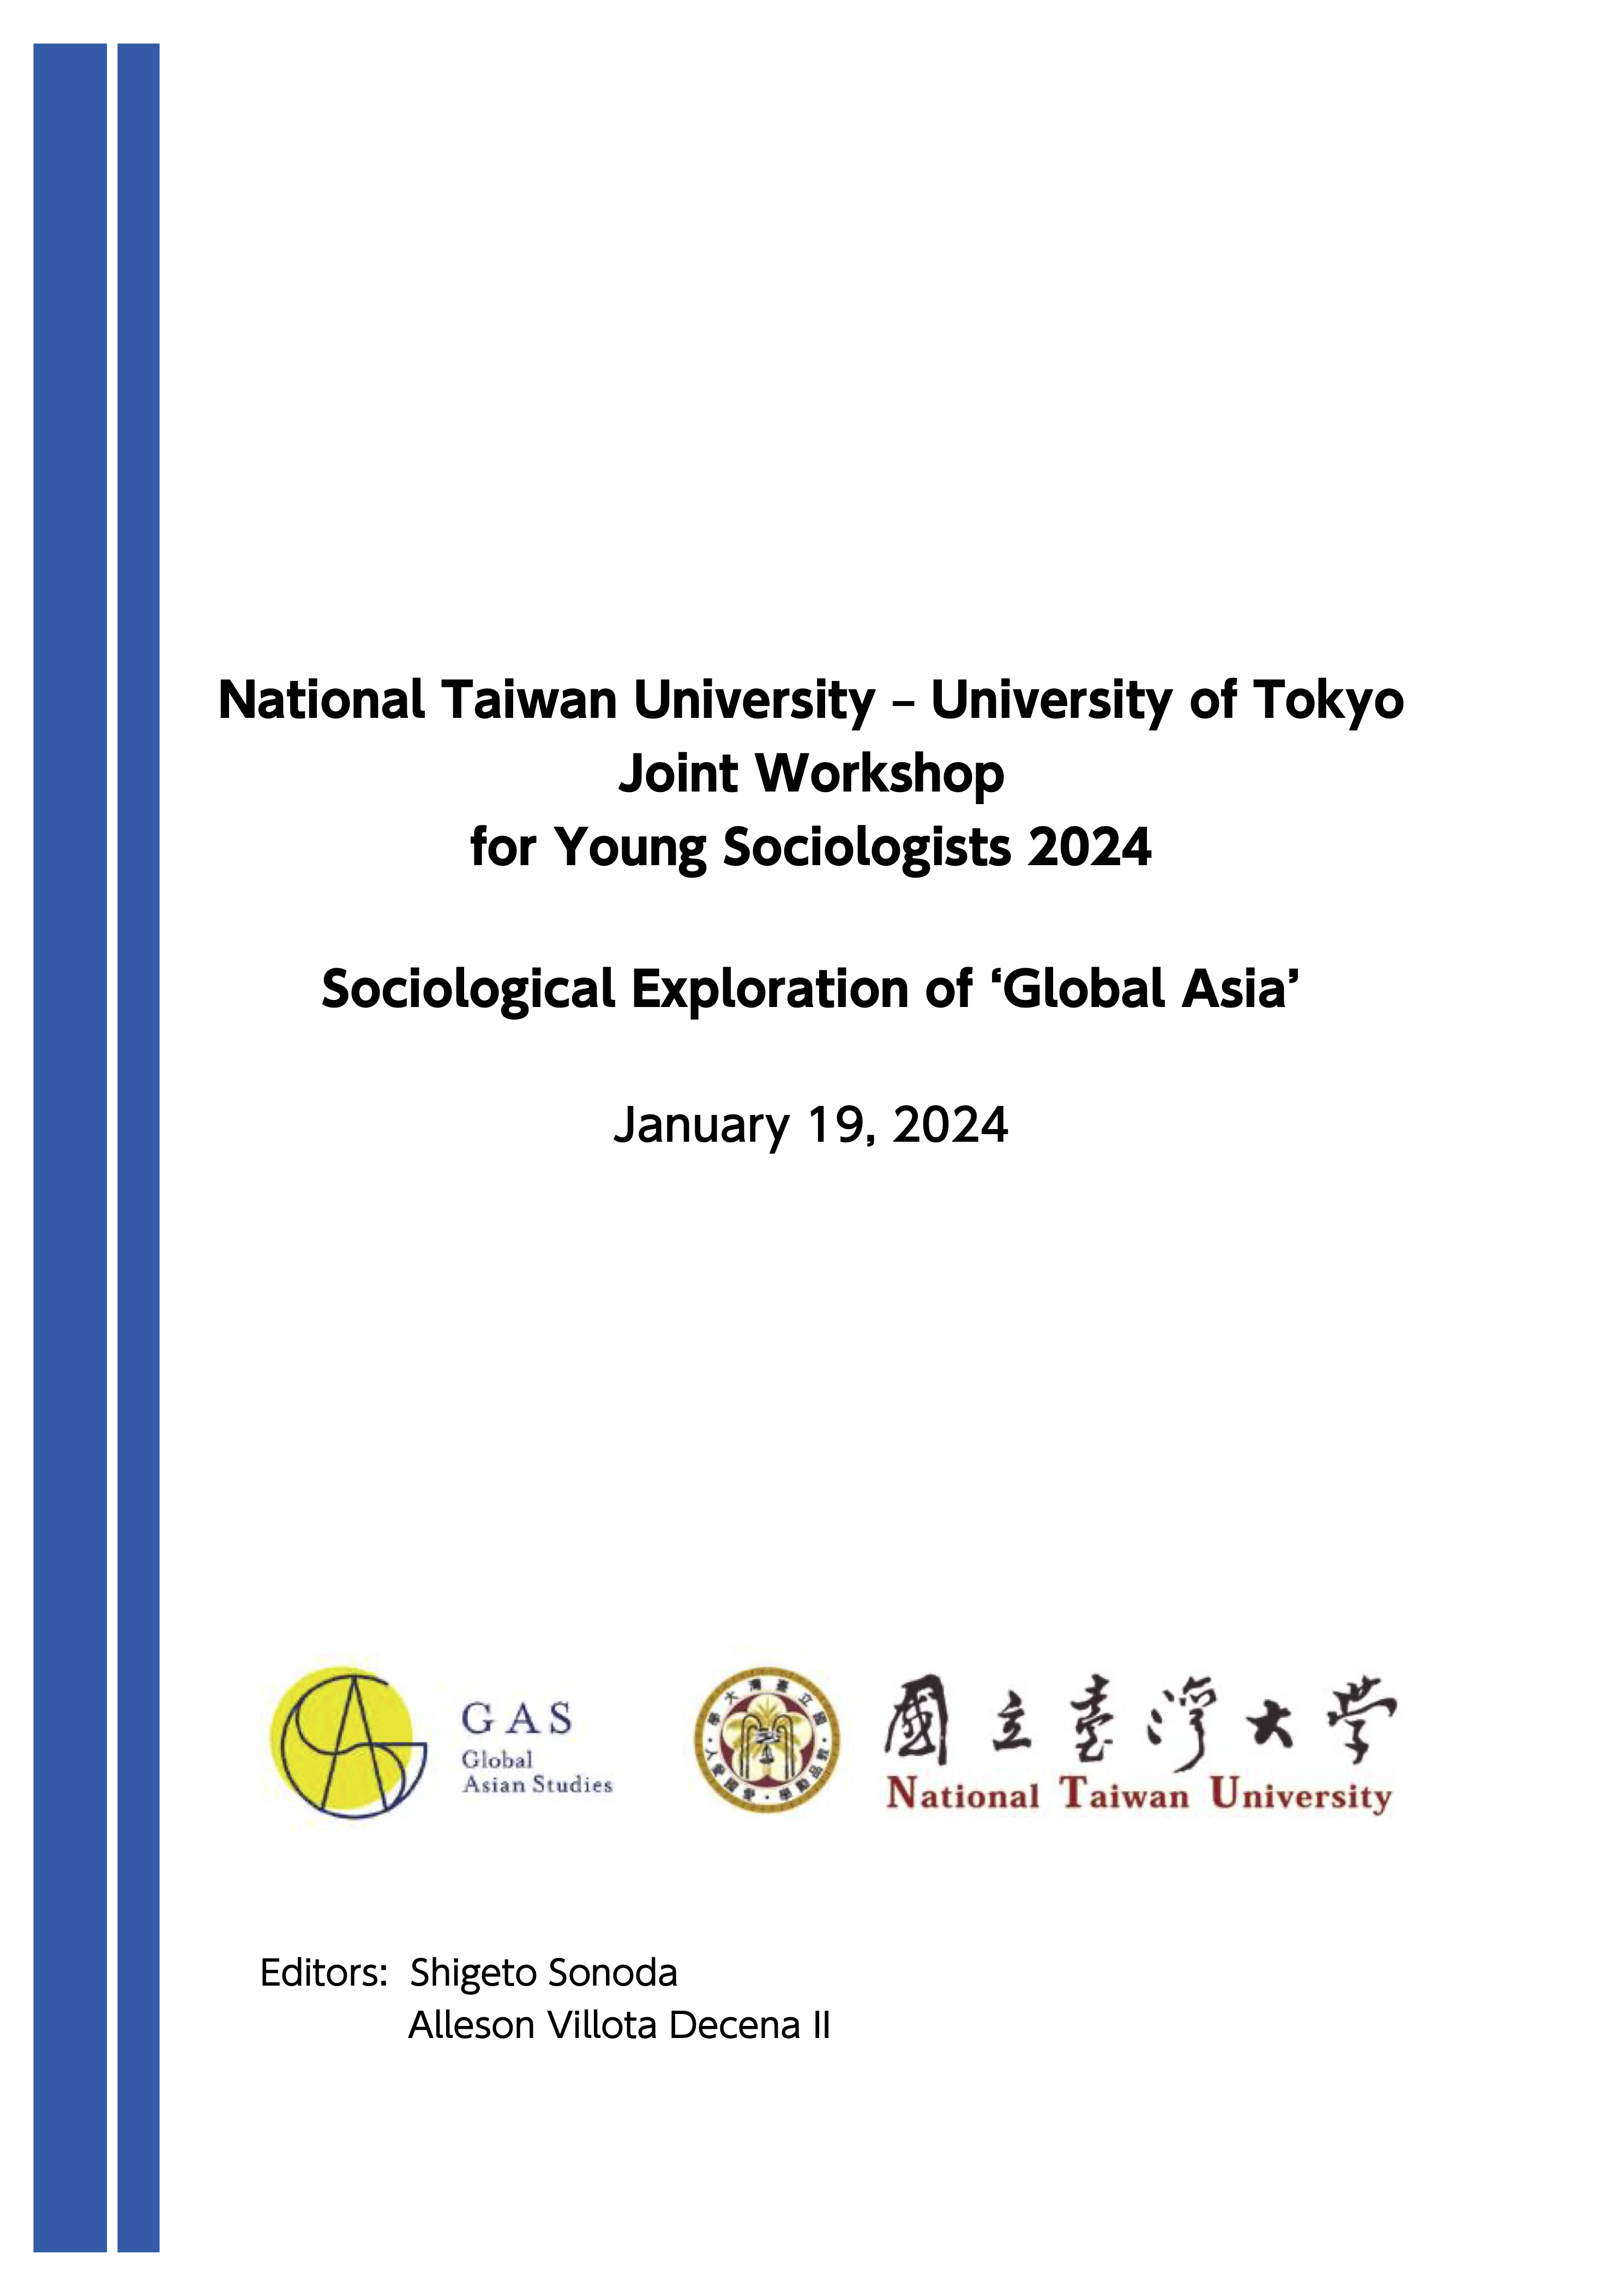 Booklet “National Taiwan University – University of Tokyo Joint Workshop for Young Sociologists 2024: : Sociological Exploration of ‘Global Asia’”